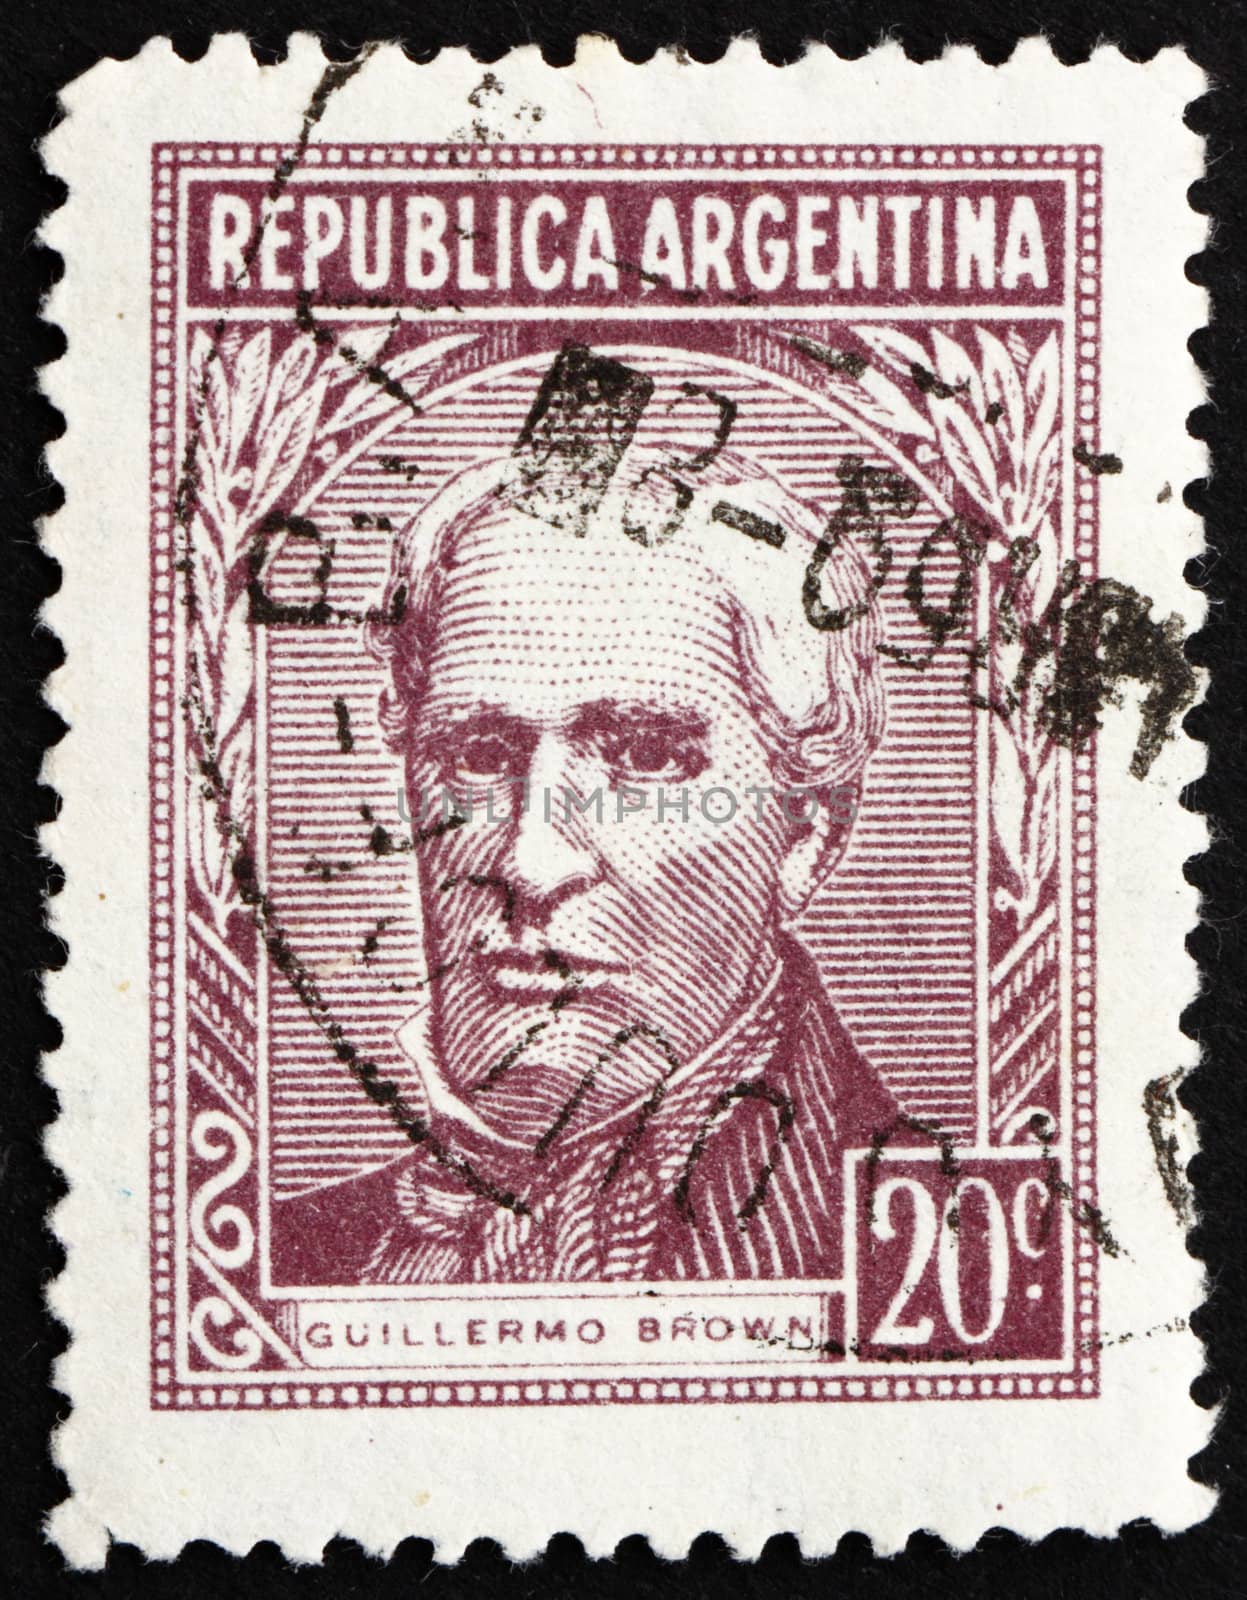 ARGENTINA - CIRCA 1956: a stamp printed in the Argentina shows Guillermo Brown, First Admiral of Argentina, circa 1956